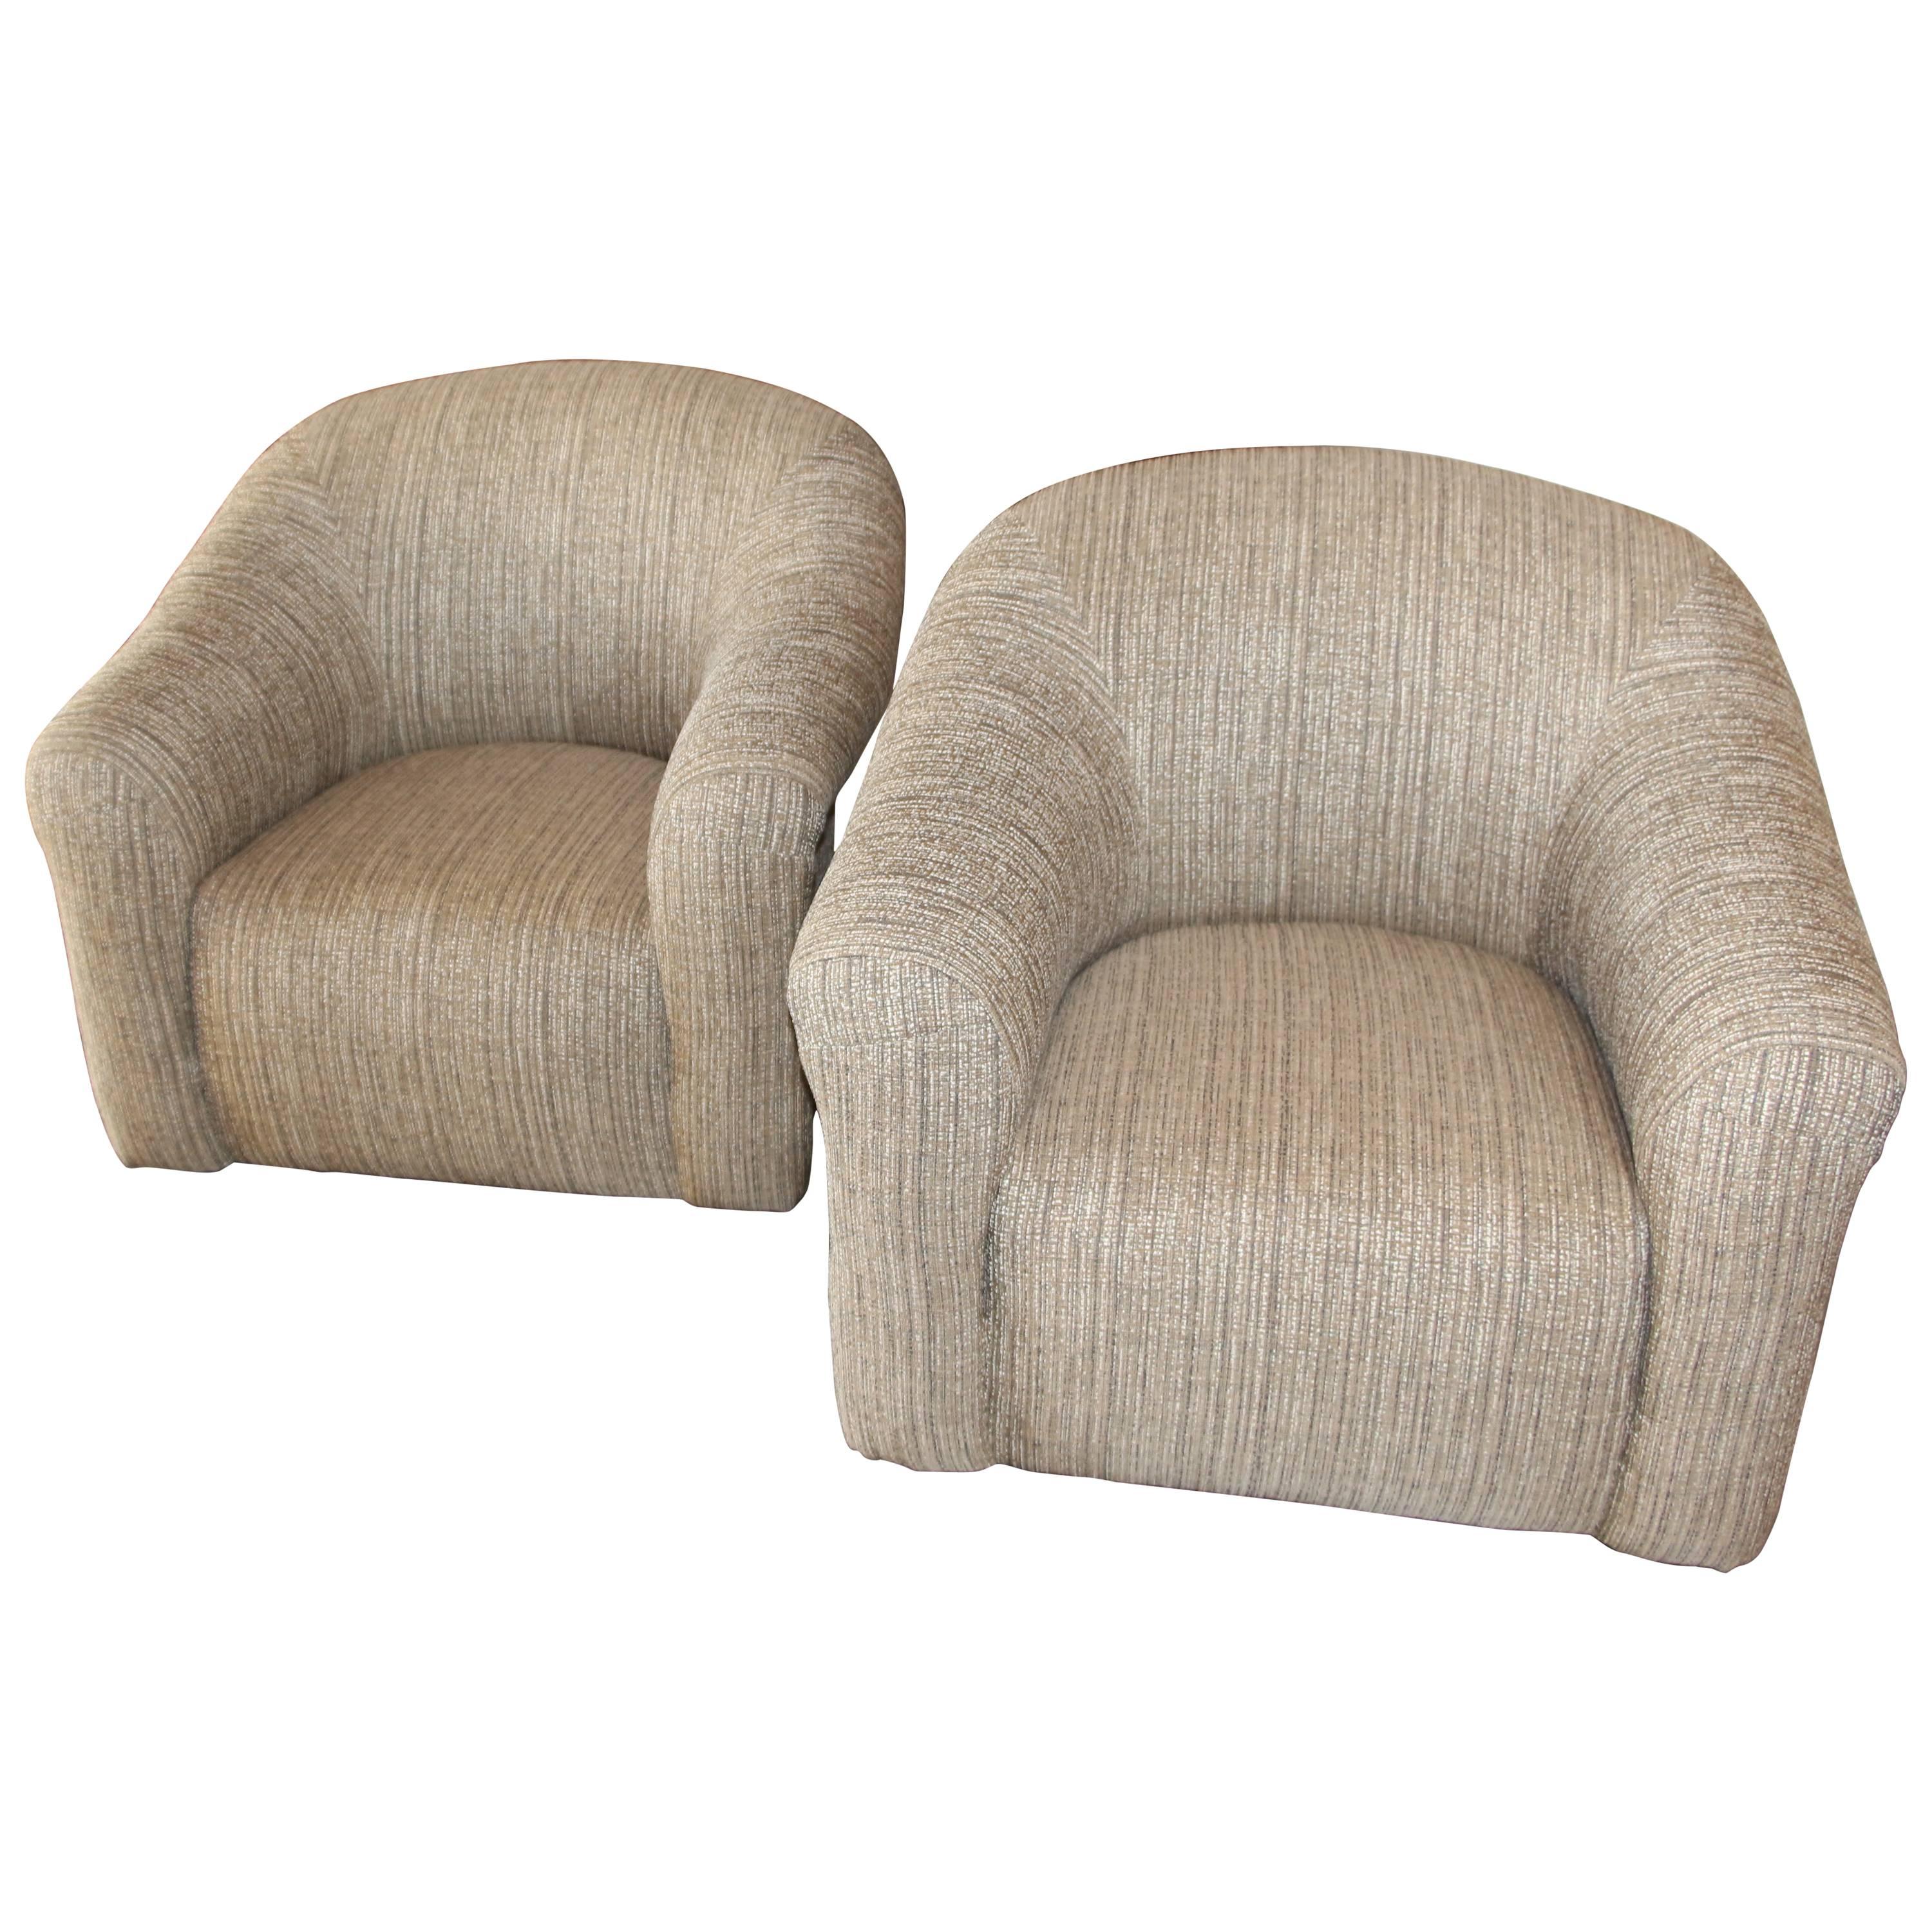 A nice pair of comfortable swivel A. Rudin chairs re-upholstered in a pretty Sina Pearson silk linen blend. Nicely redone with detailed stitching on he arms and gathered on the back. The ottomans are on ball casters as well. Ottomans are 26 x 19